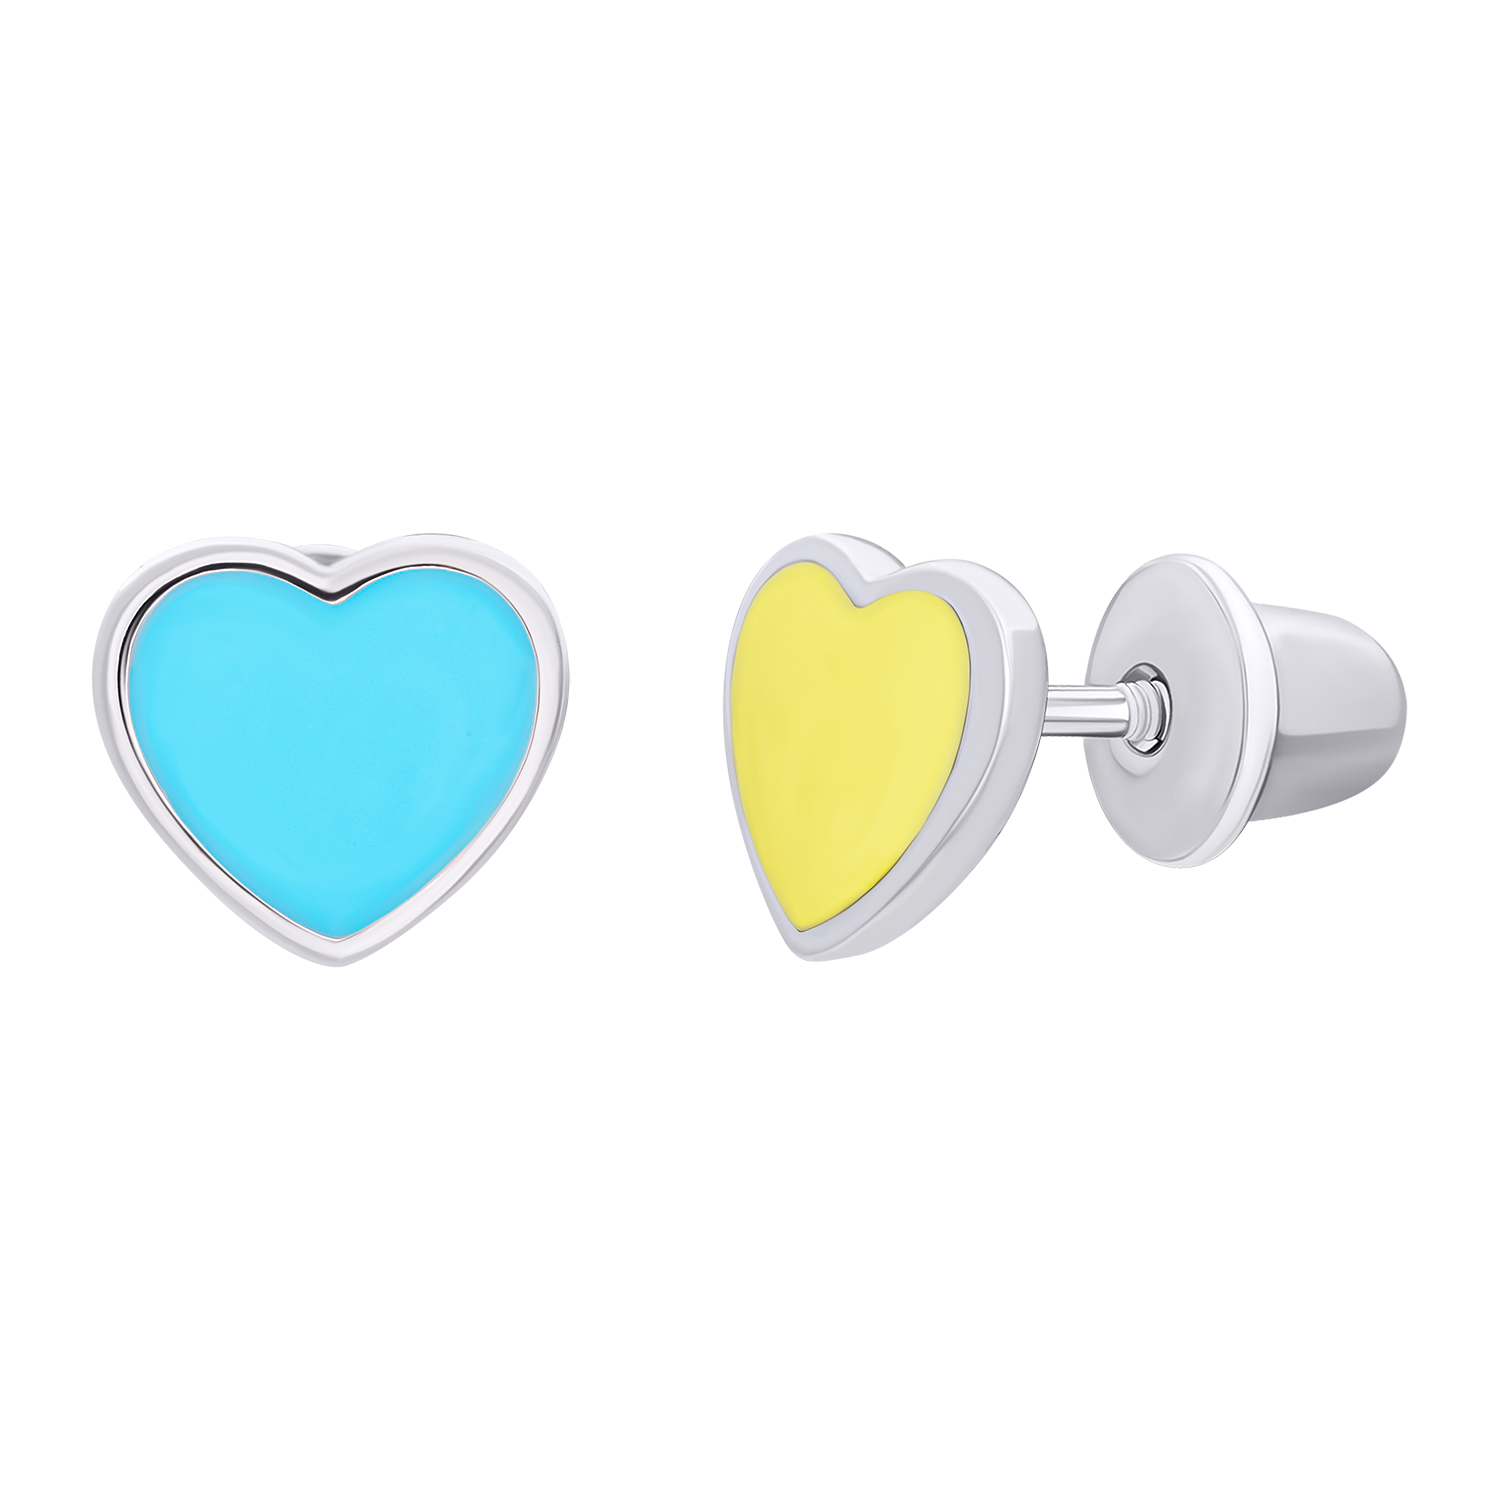 Stud earrings Ukraine in the form of heart with yellow and blue enamel